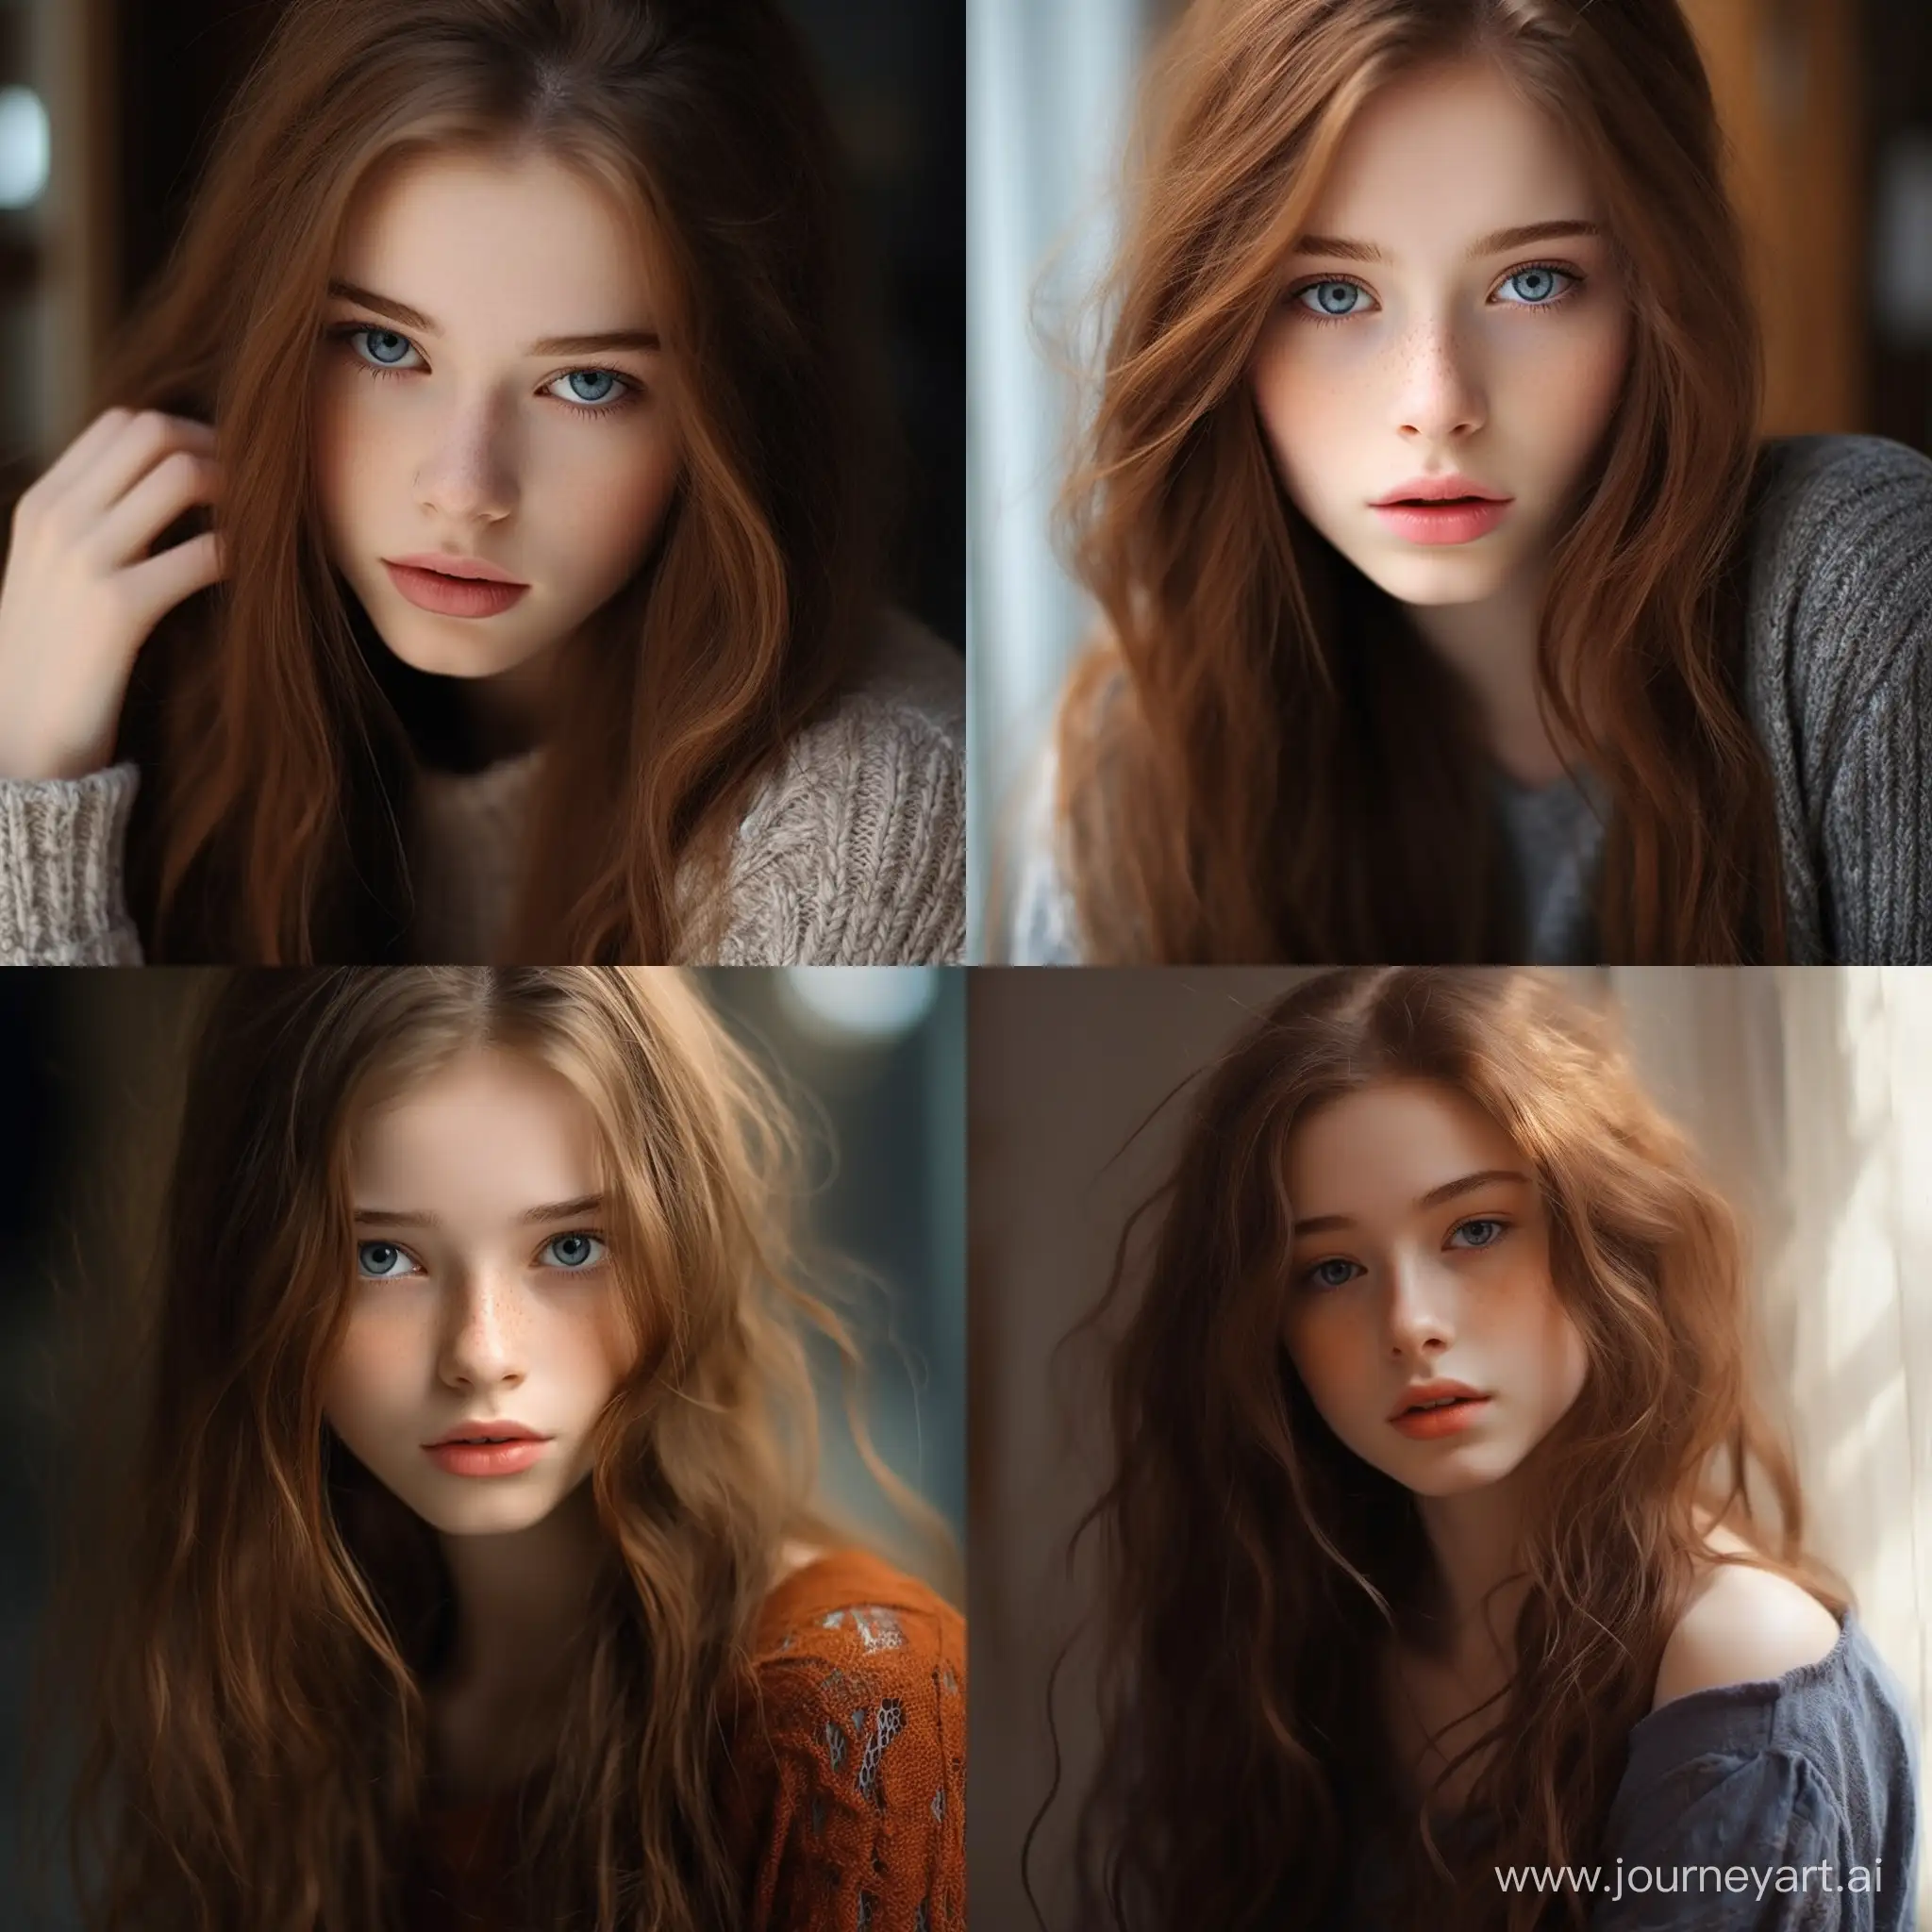 Mysterious-Teen-with-Blue-Eyes-Captivating-Portrait